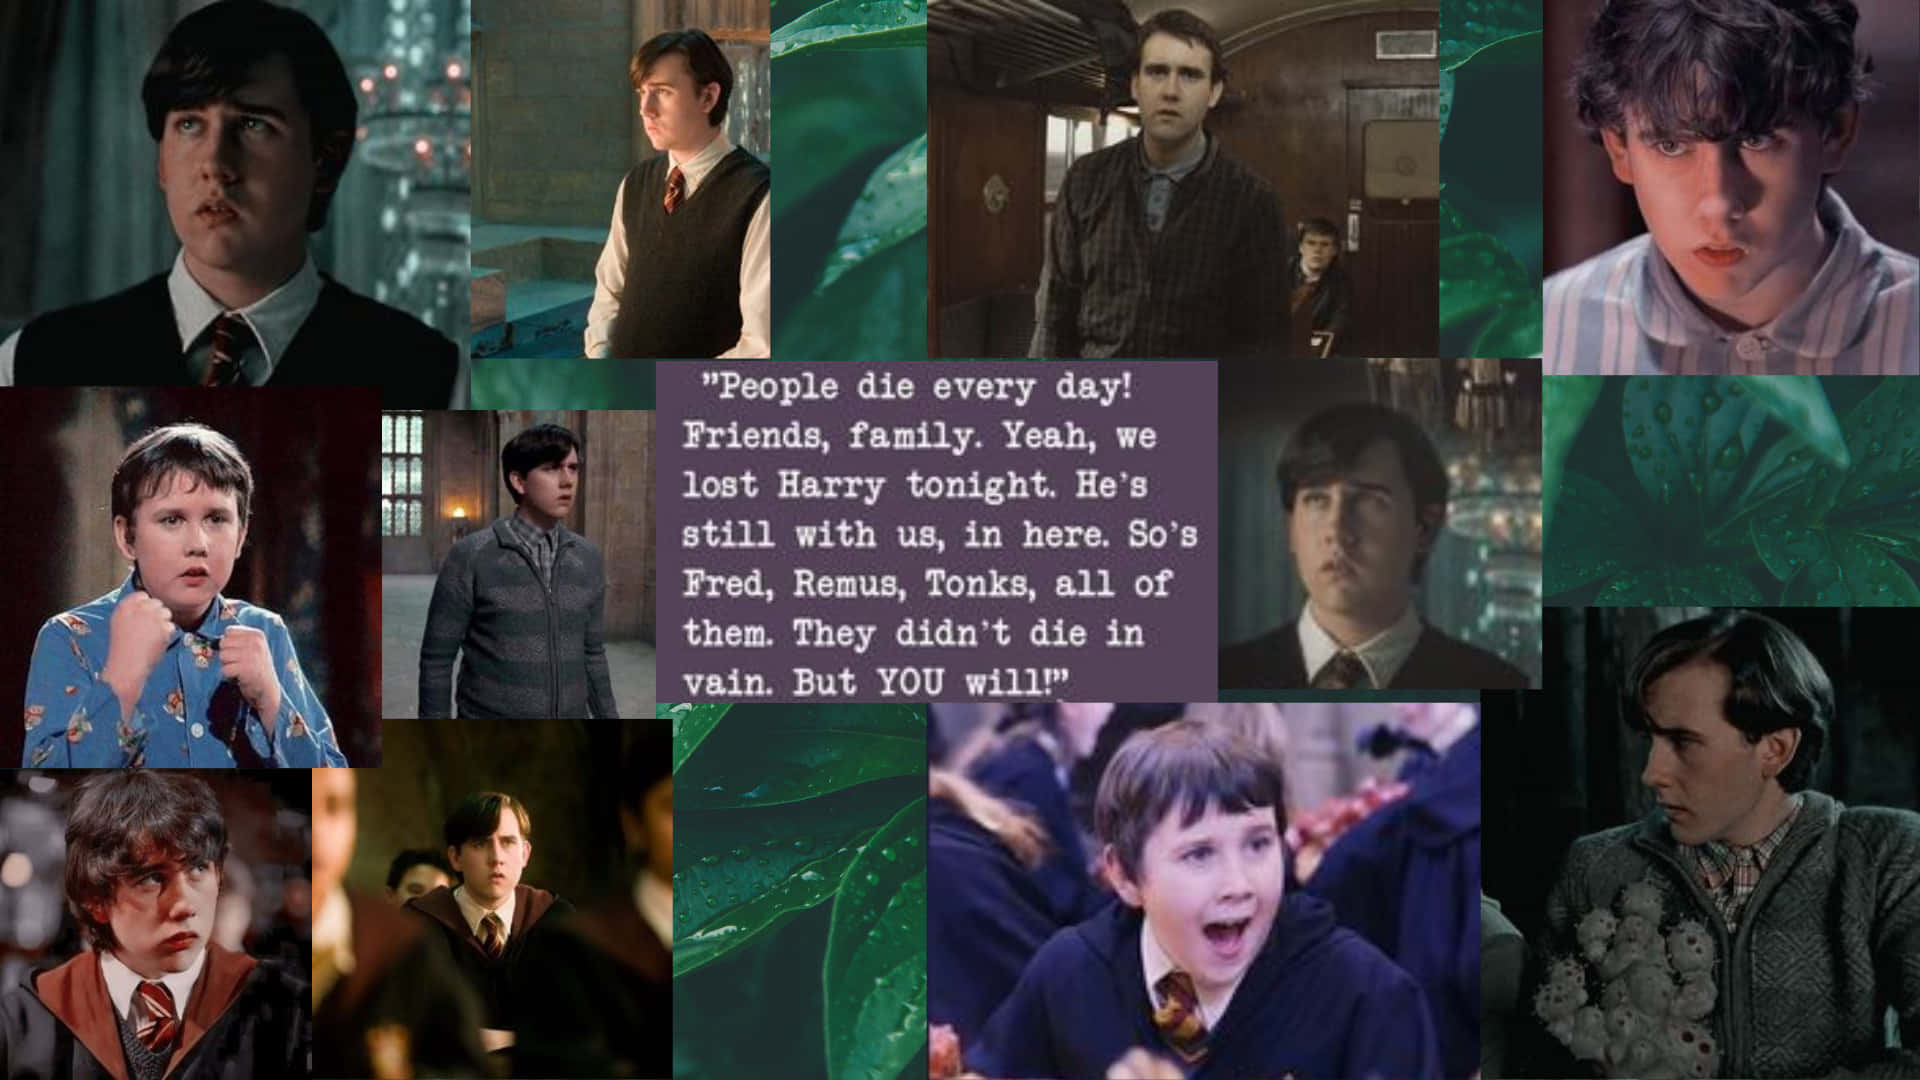 Neville Longbottom bravely holding his wand in a magical moment. Wallpaper